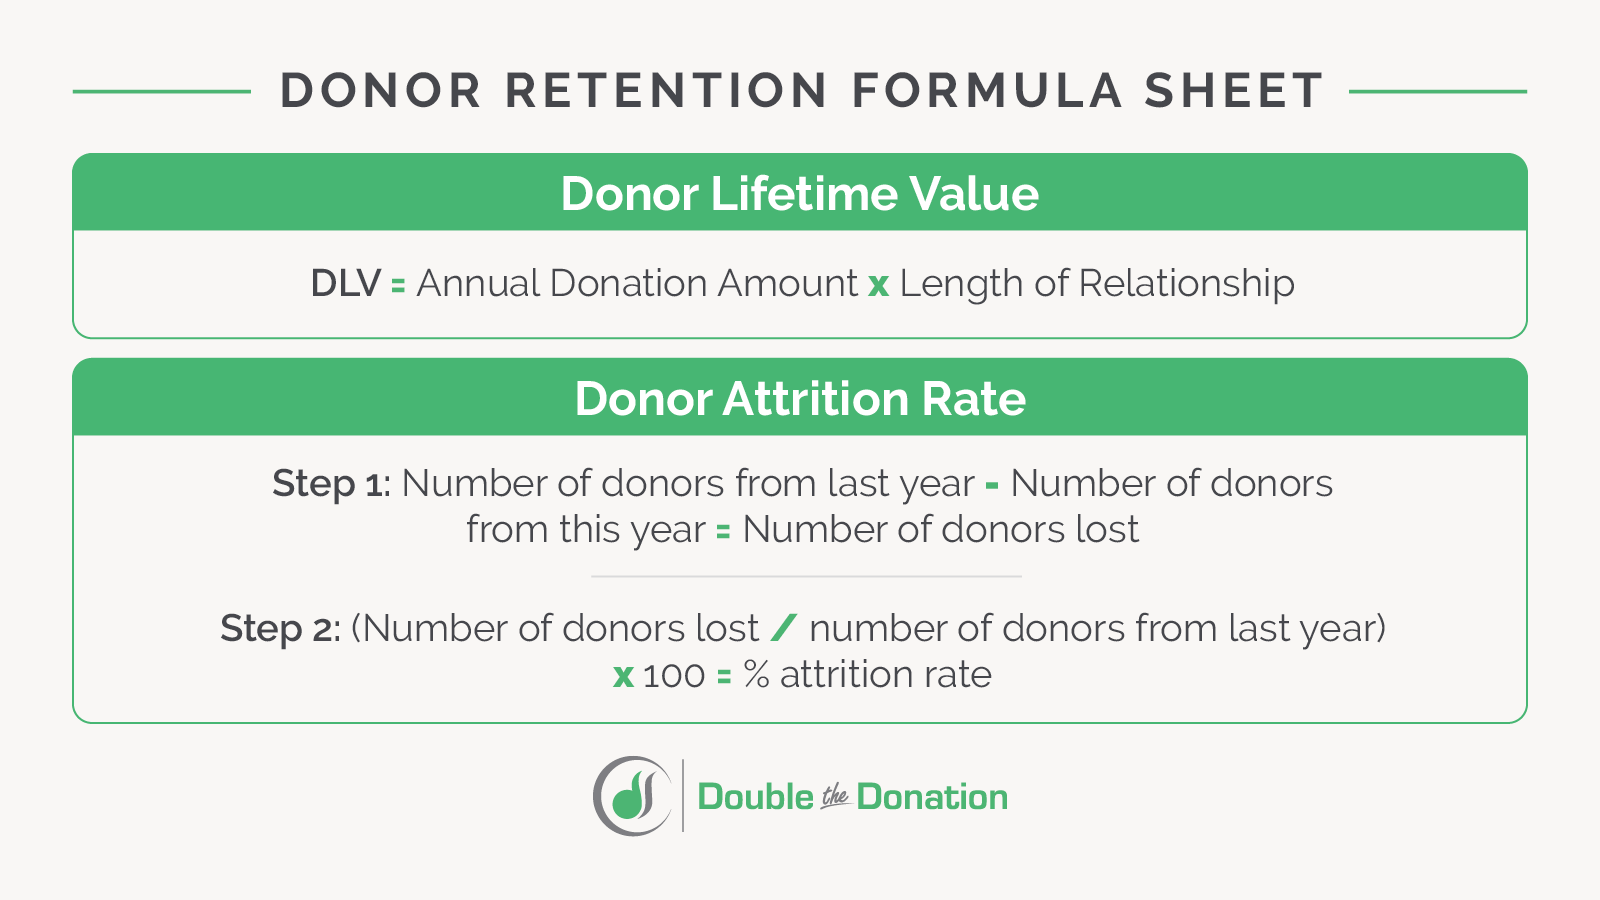 Donor retention formulas for lifetime value and attrition rate are depicted. 